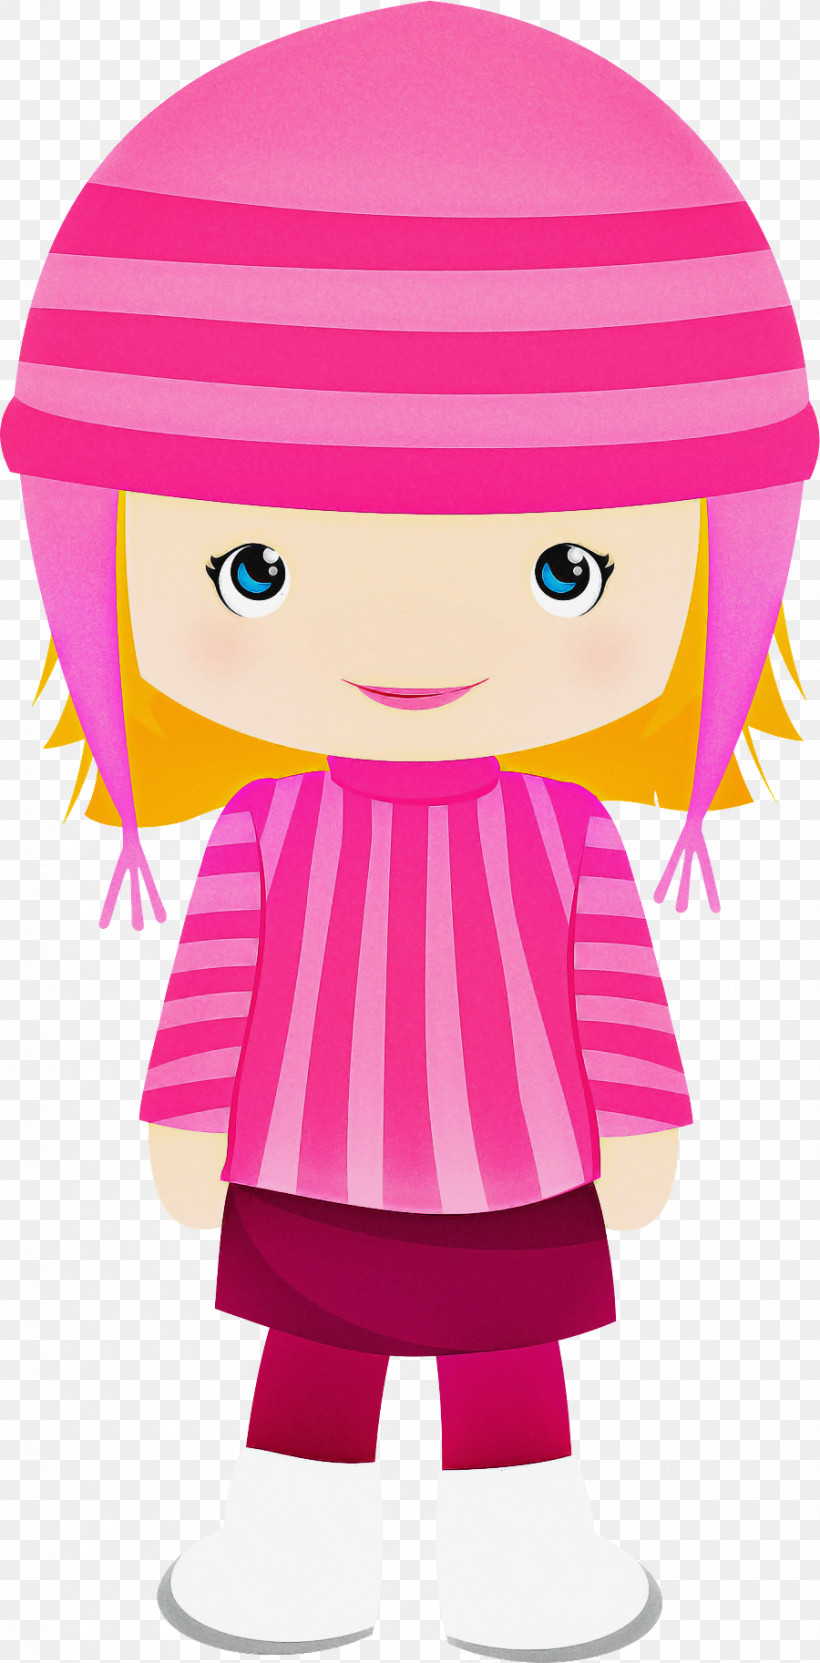 Cartoon Pink Doll Magenta Toy, PNG, 900x1826px, Cartoon, Doll, Magenta, Pink, Toy Download Free